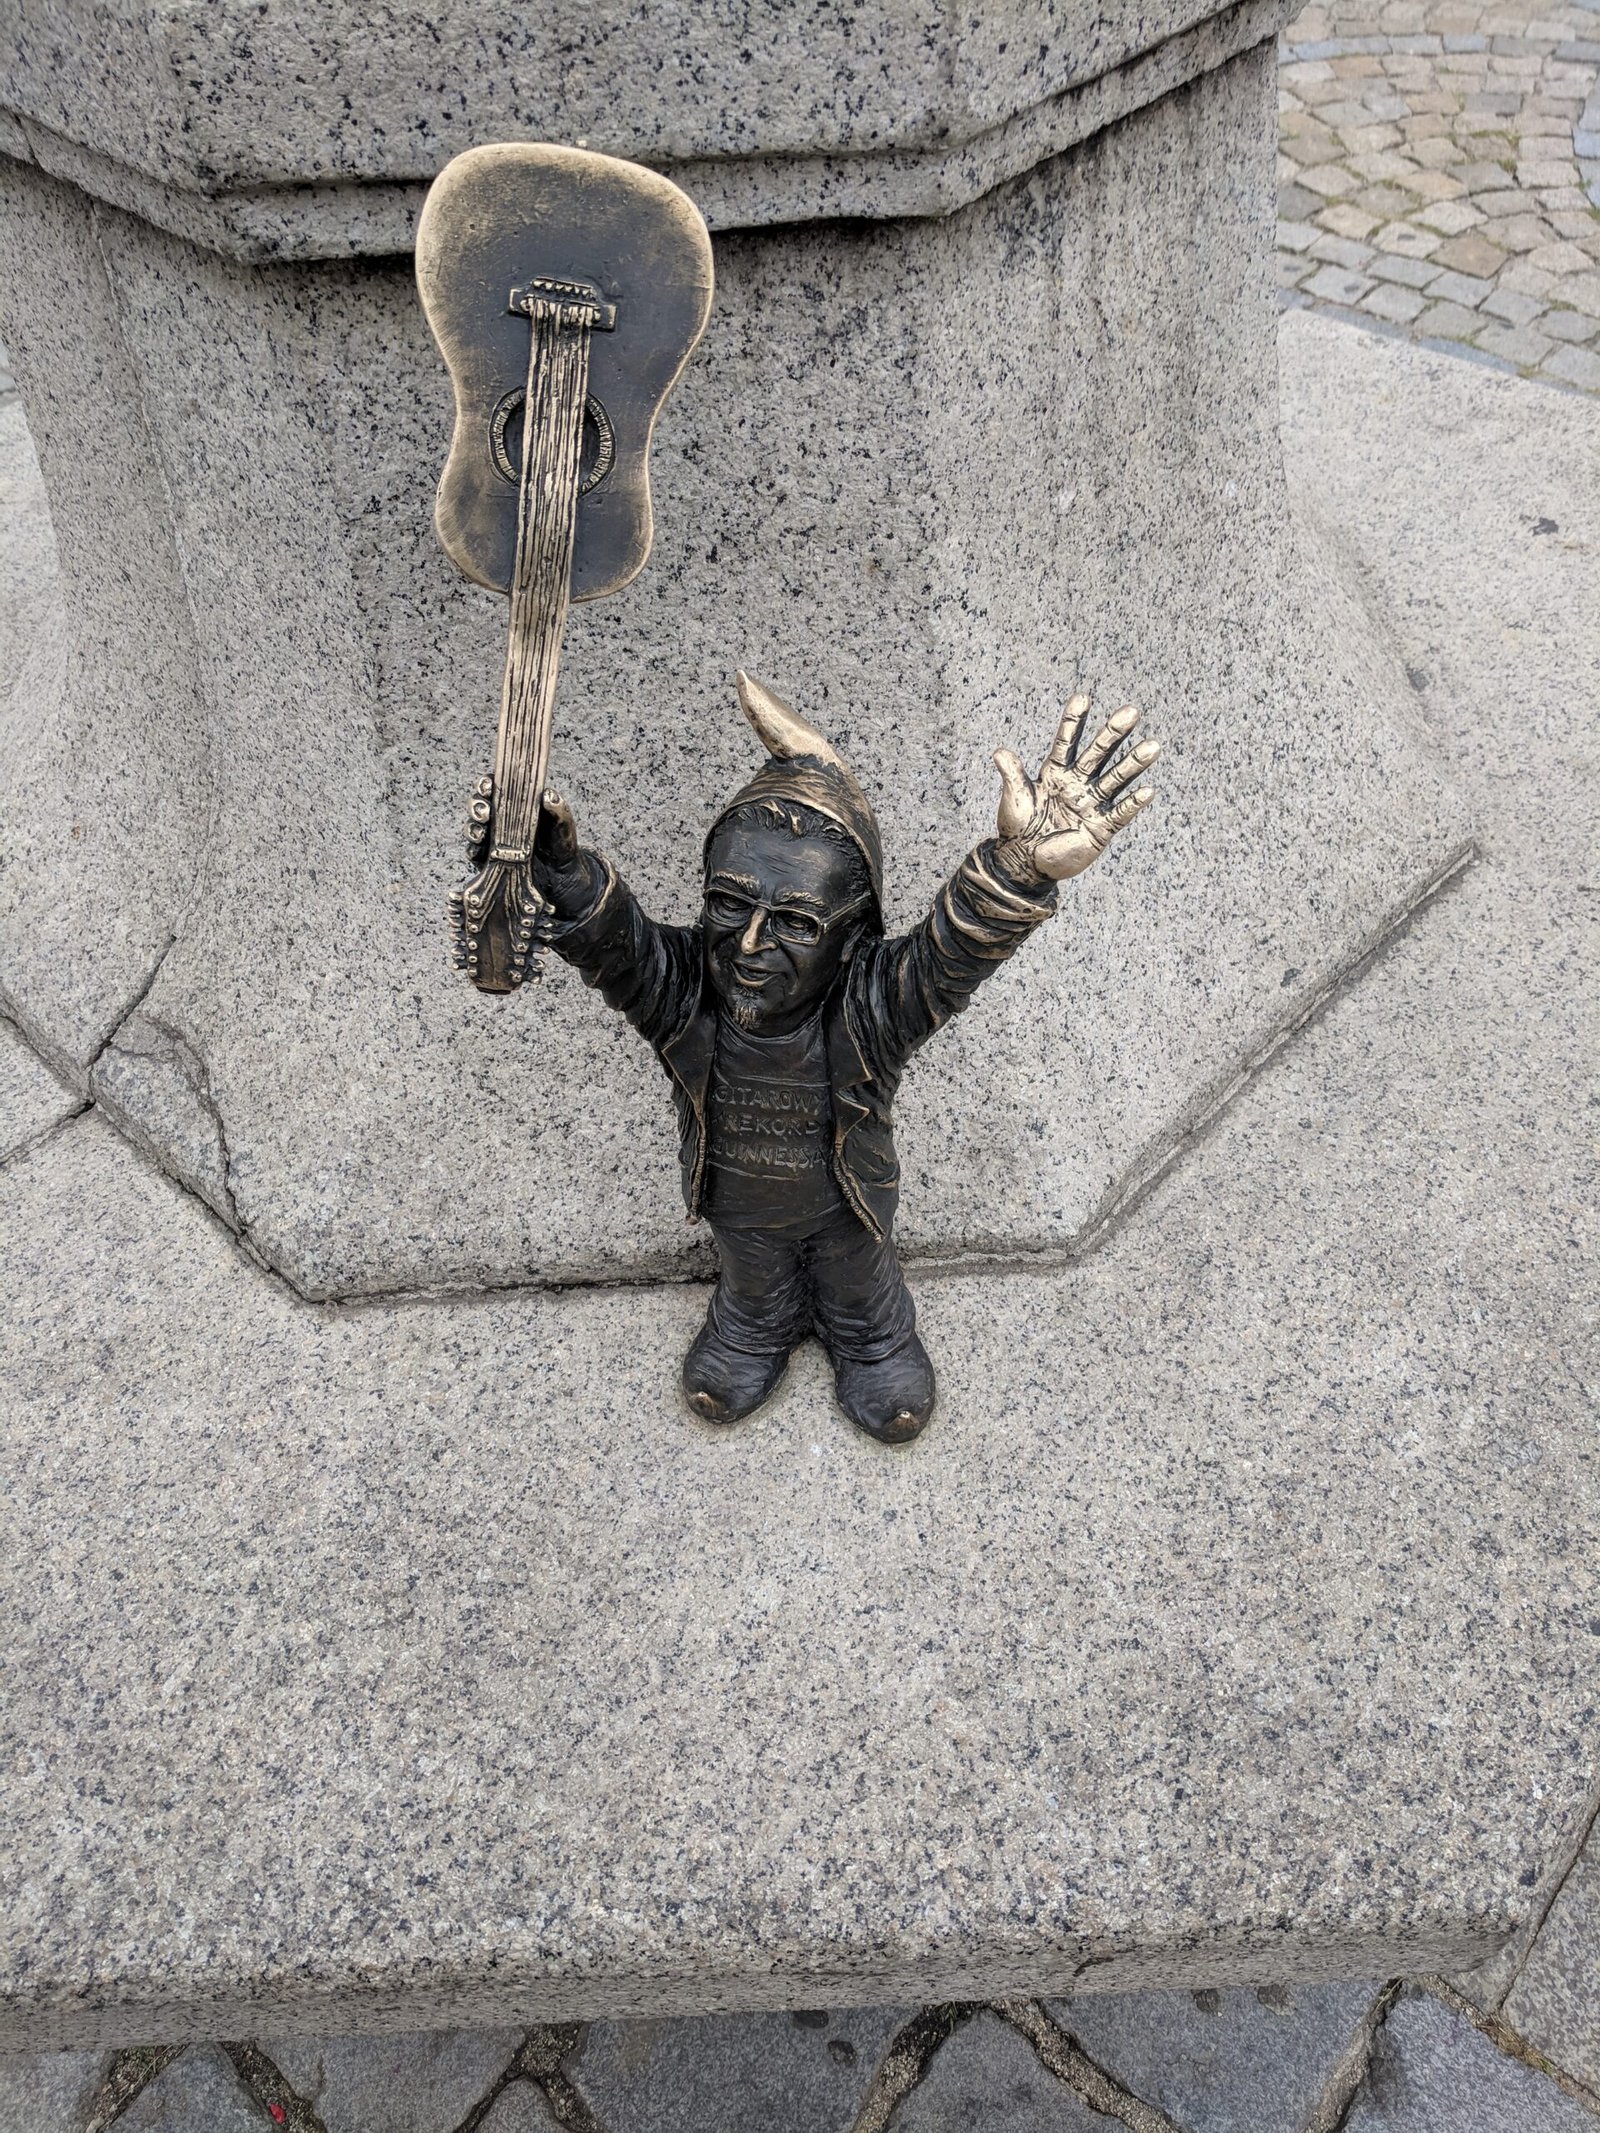 a 3-day itinerary in wrocław | a statue of a dwarf holding a guitar